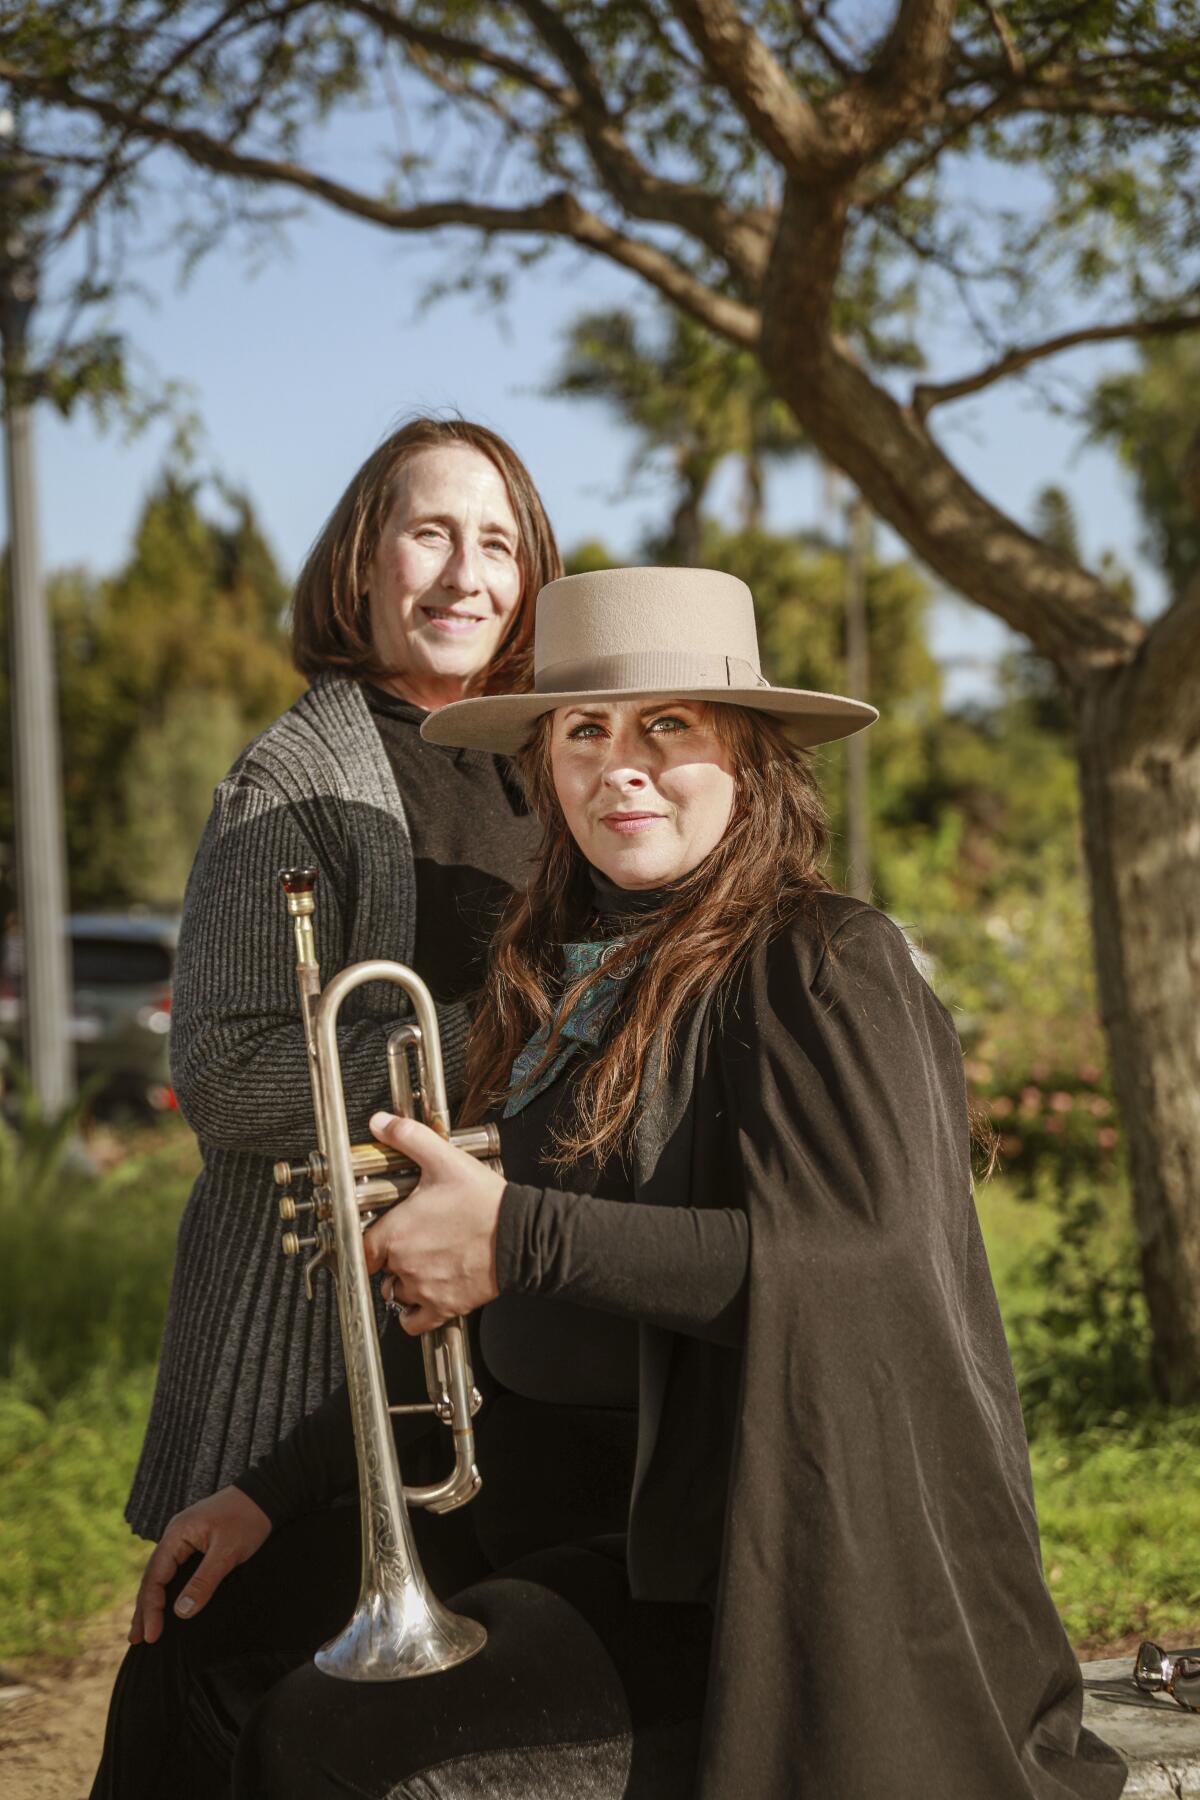 Tori Roze, at right, with her mother and Hot Mess band mate, Lee Clark